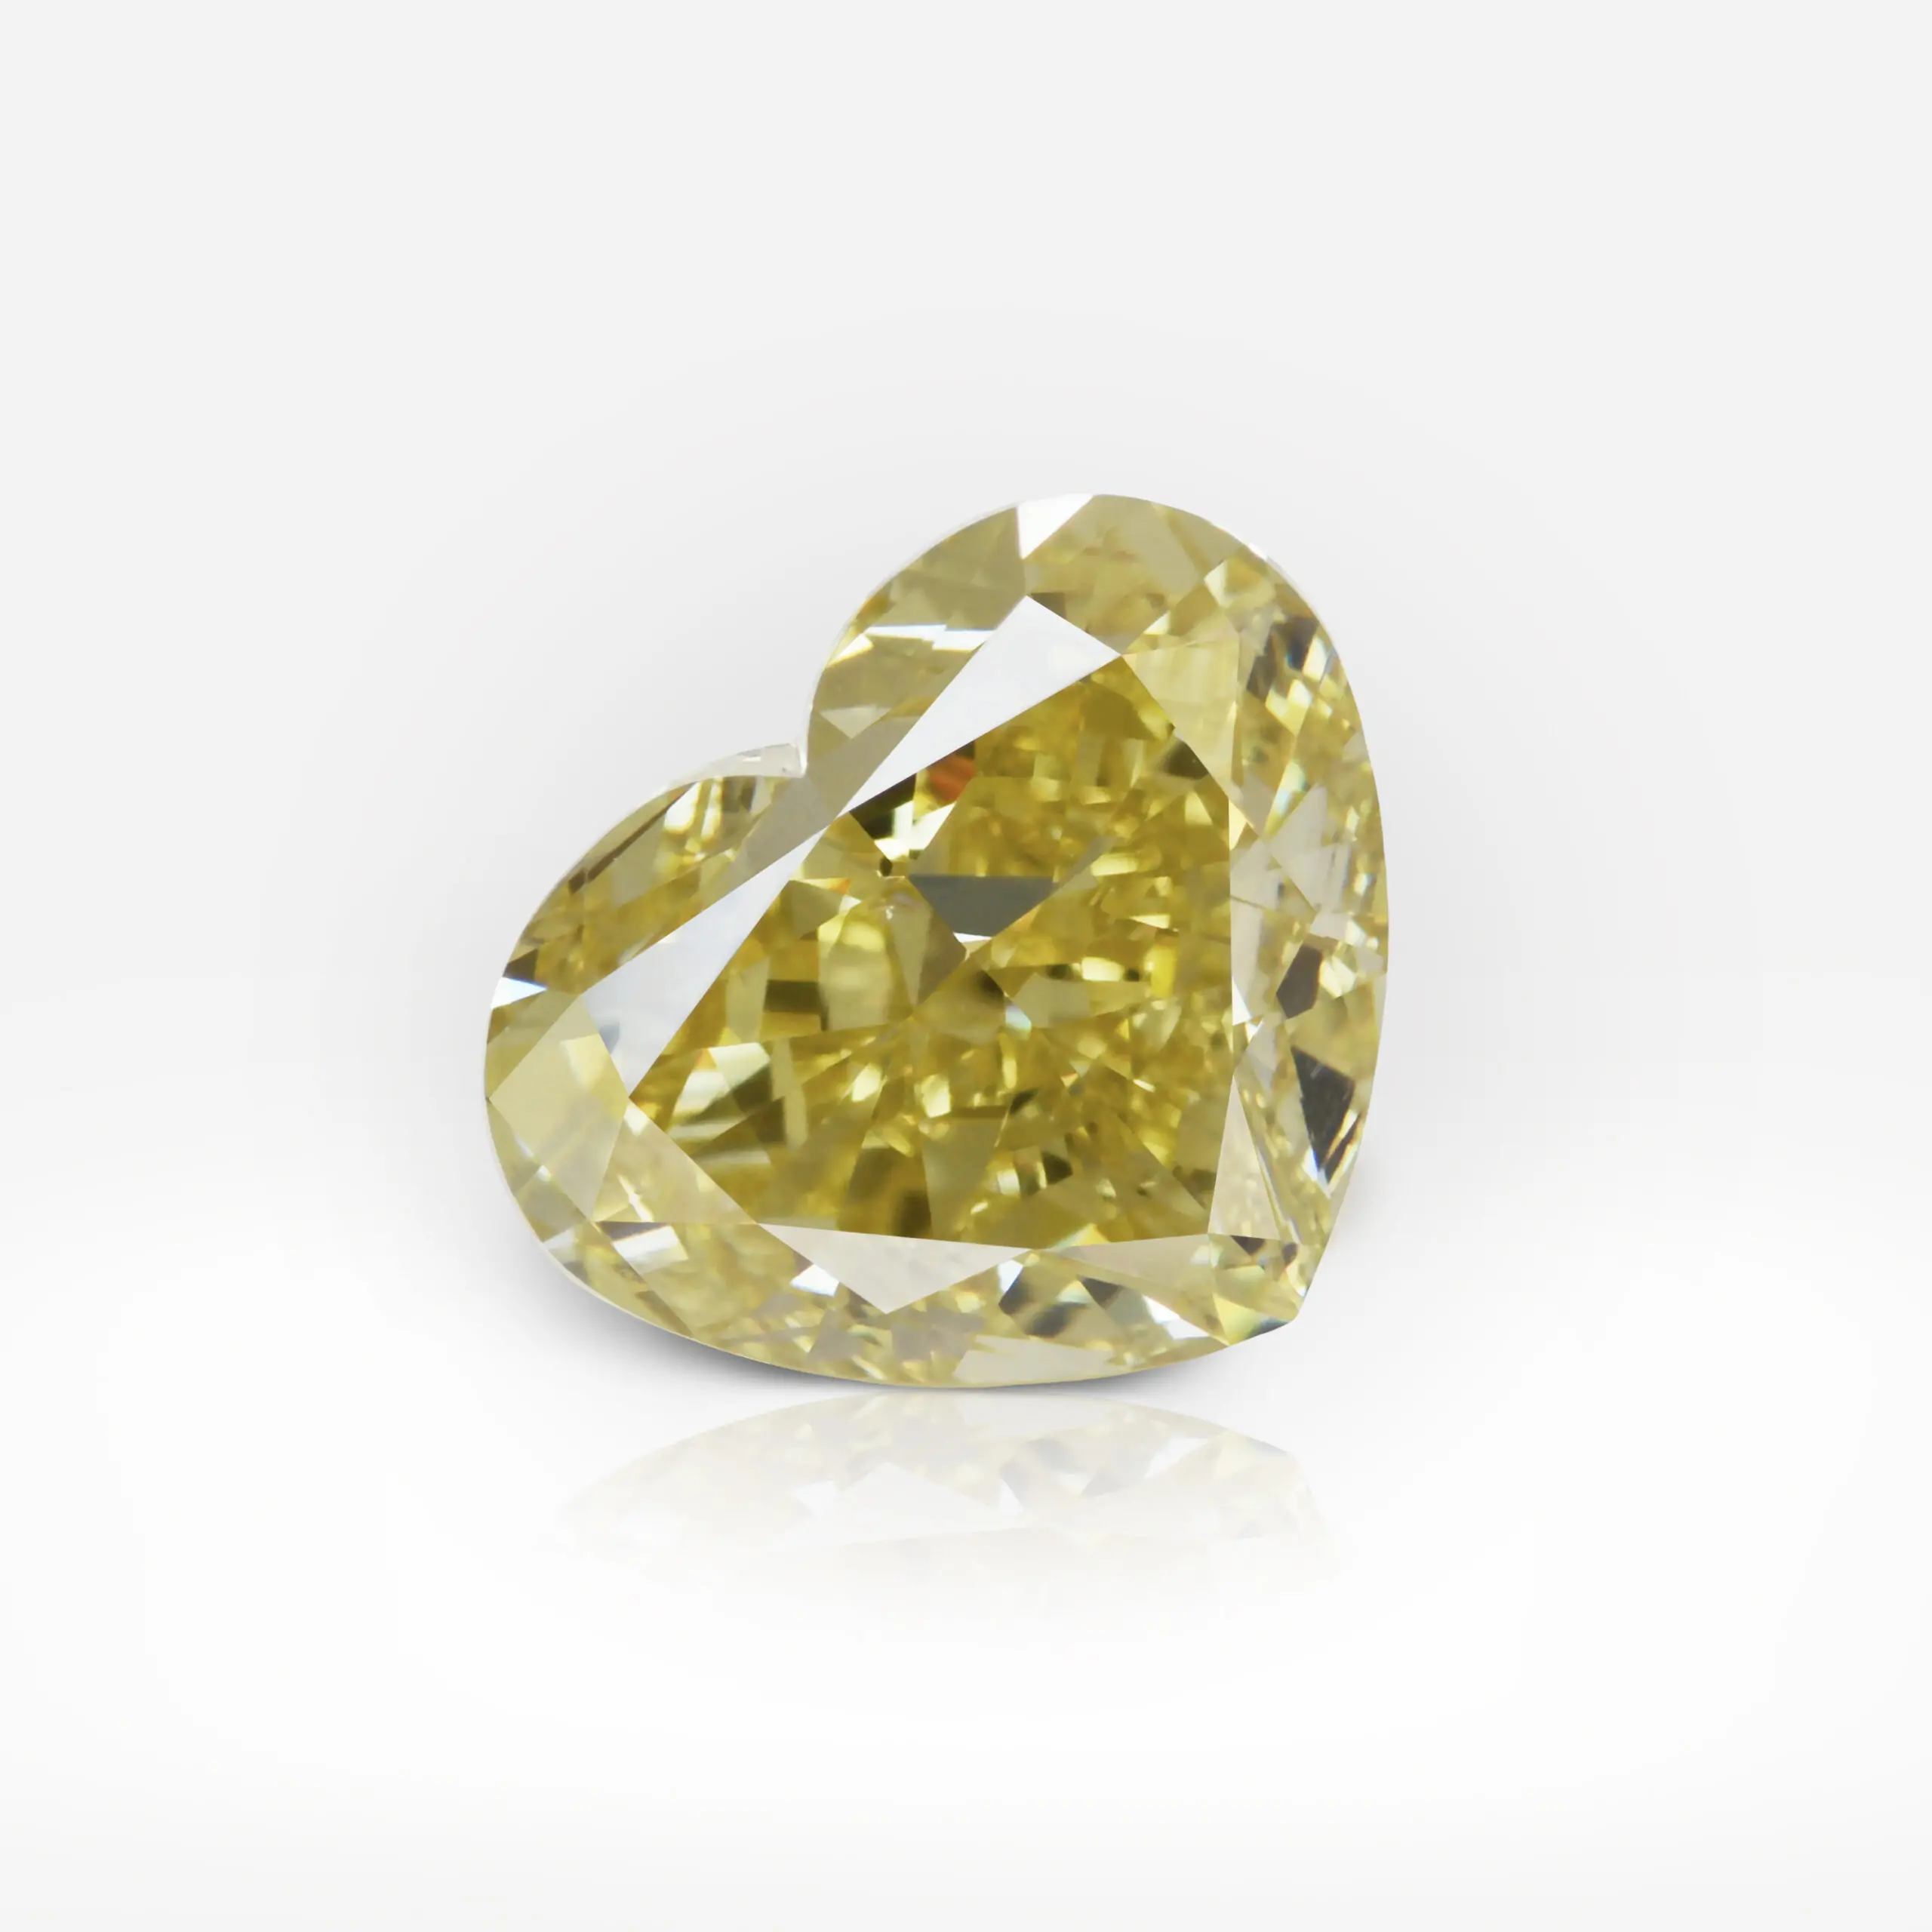 3.01 and 3.01 carat Pair of Studs Fancy Intense Yellow VS2/SI1 Heart Shape Diamonds GIA - thumb picture 1